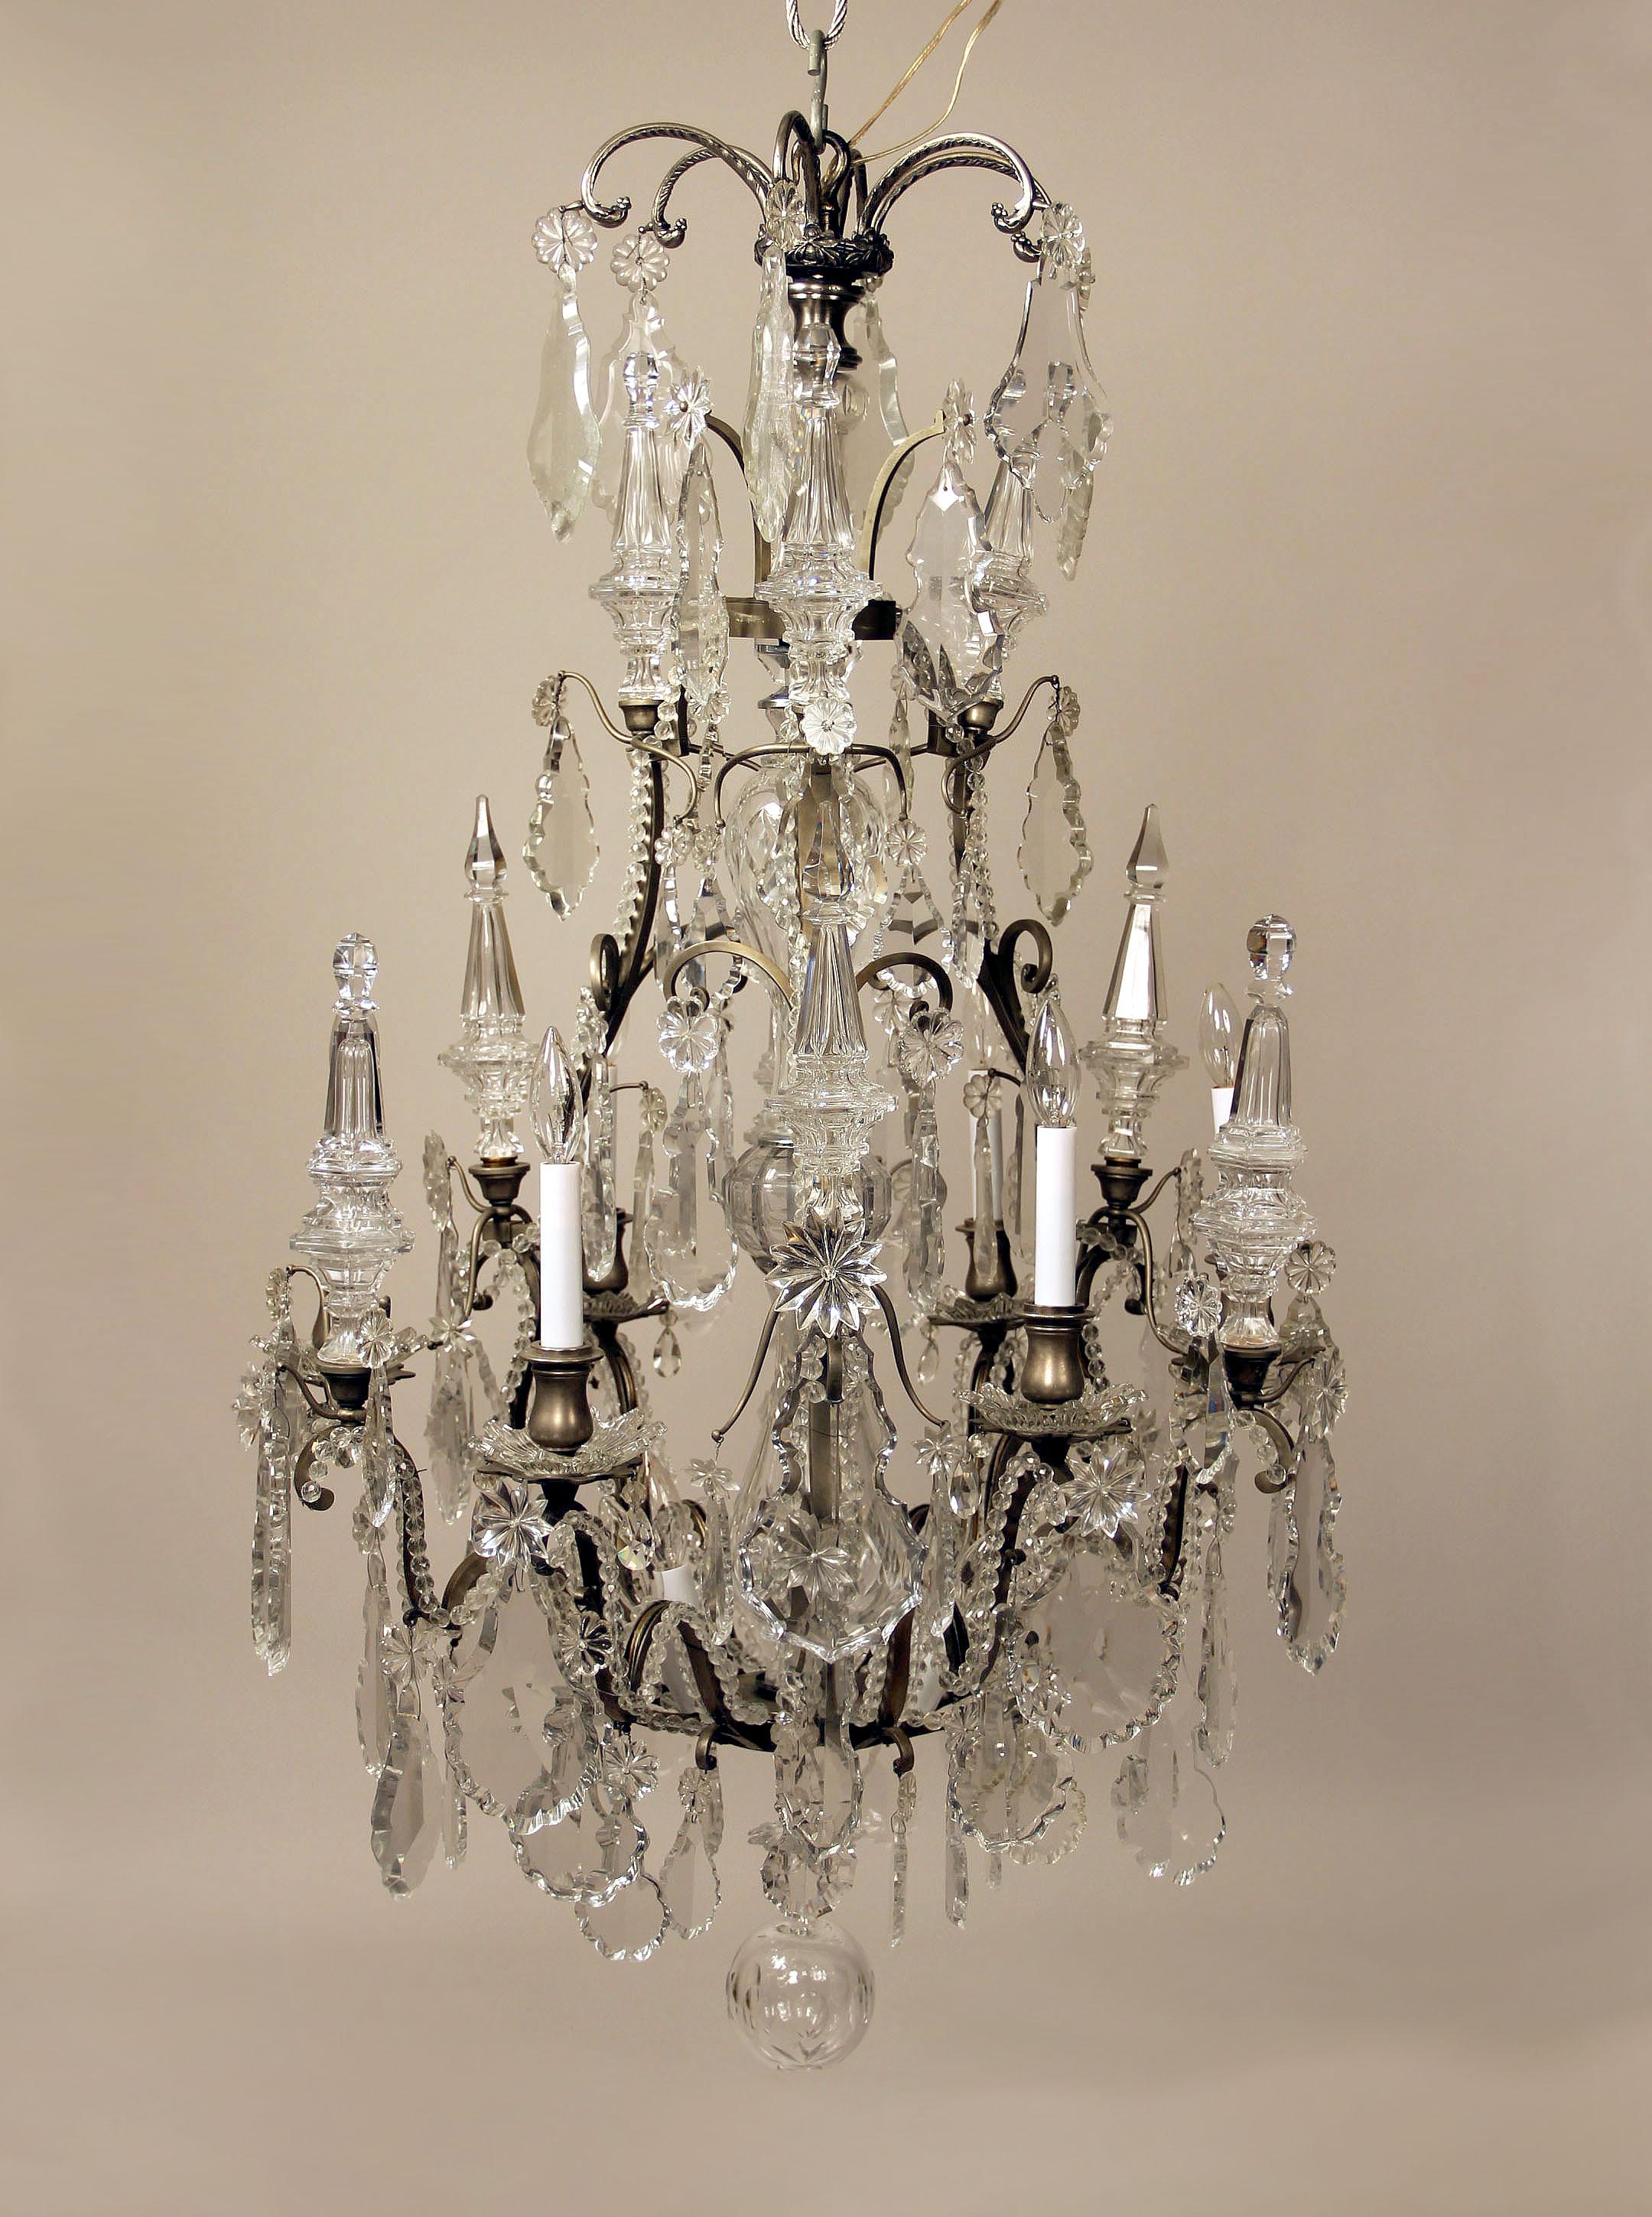  A Late 19th Century Silvered Bronze and Baccarat Crystal Twelve Light Chandelier

Multi-faceted and shaped crystal, beaded arms, cut crystal central column, 9 tiered spears with six interior and six perimeter lights, bobeche cups.
